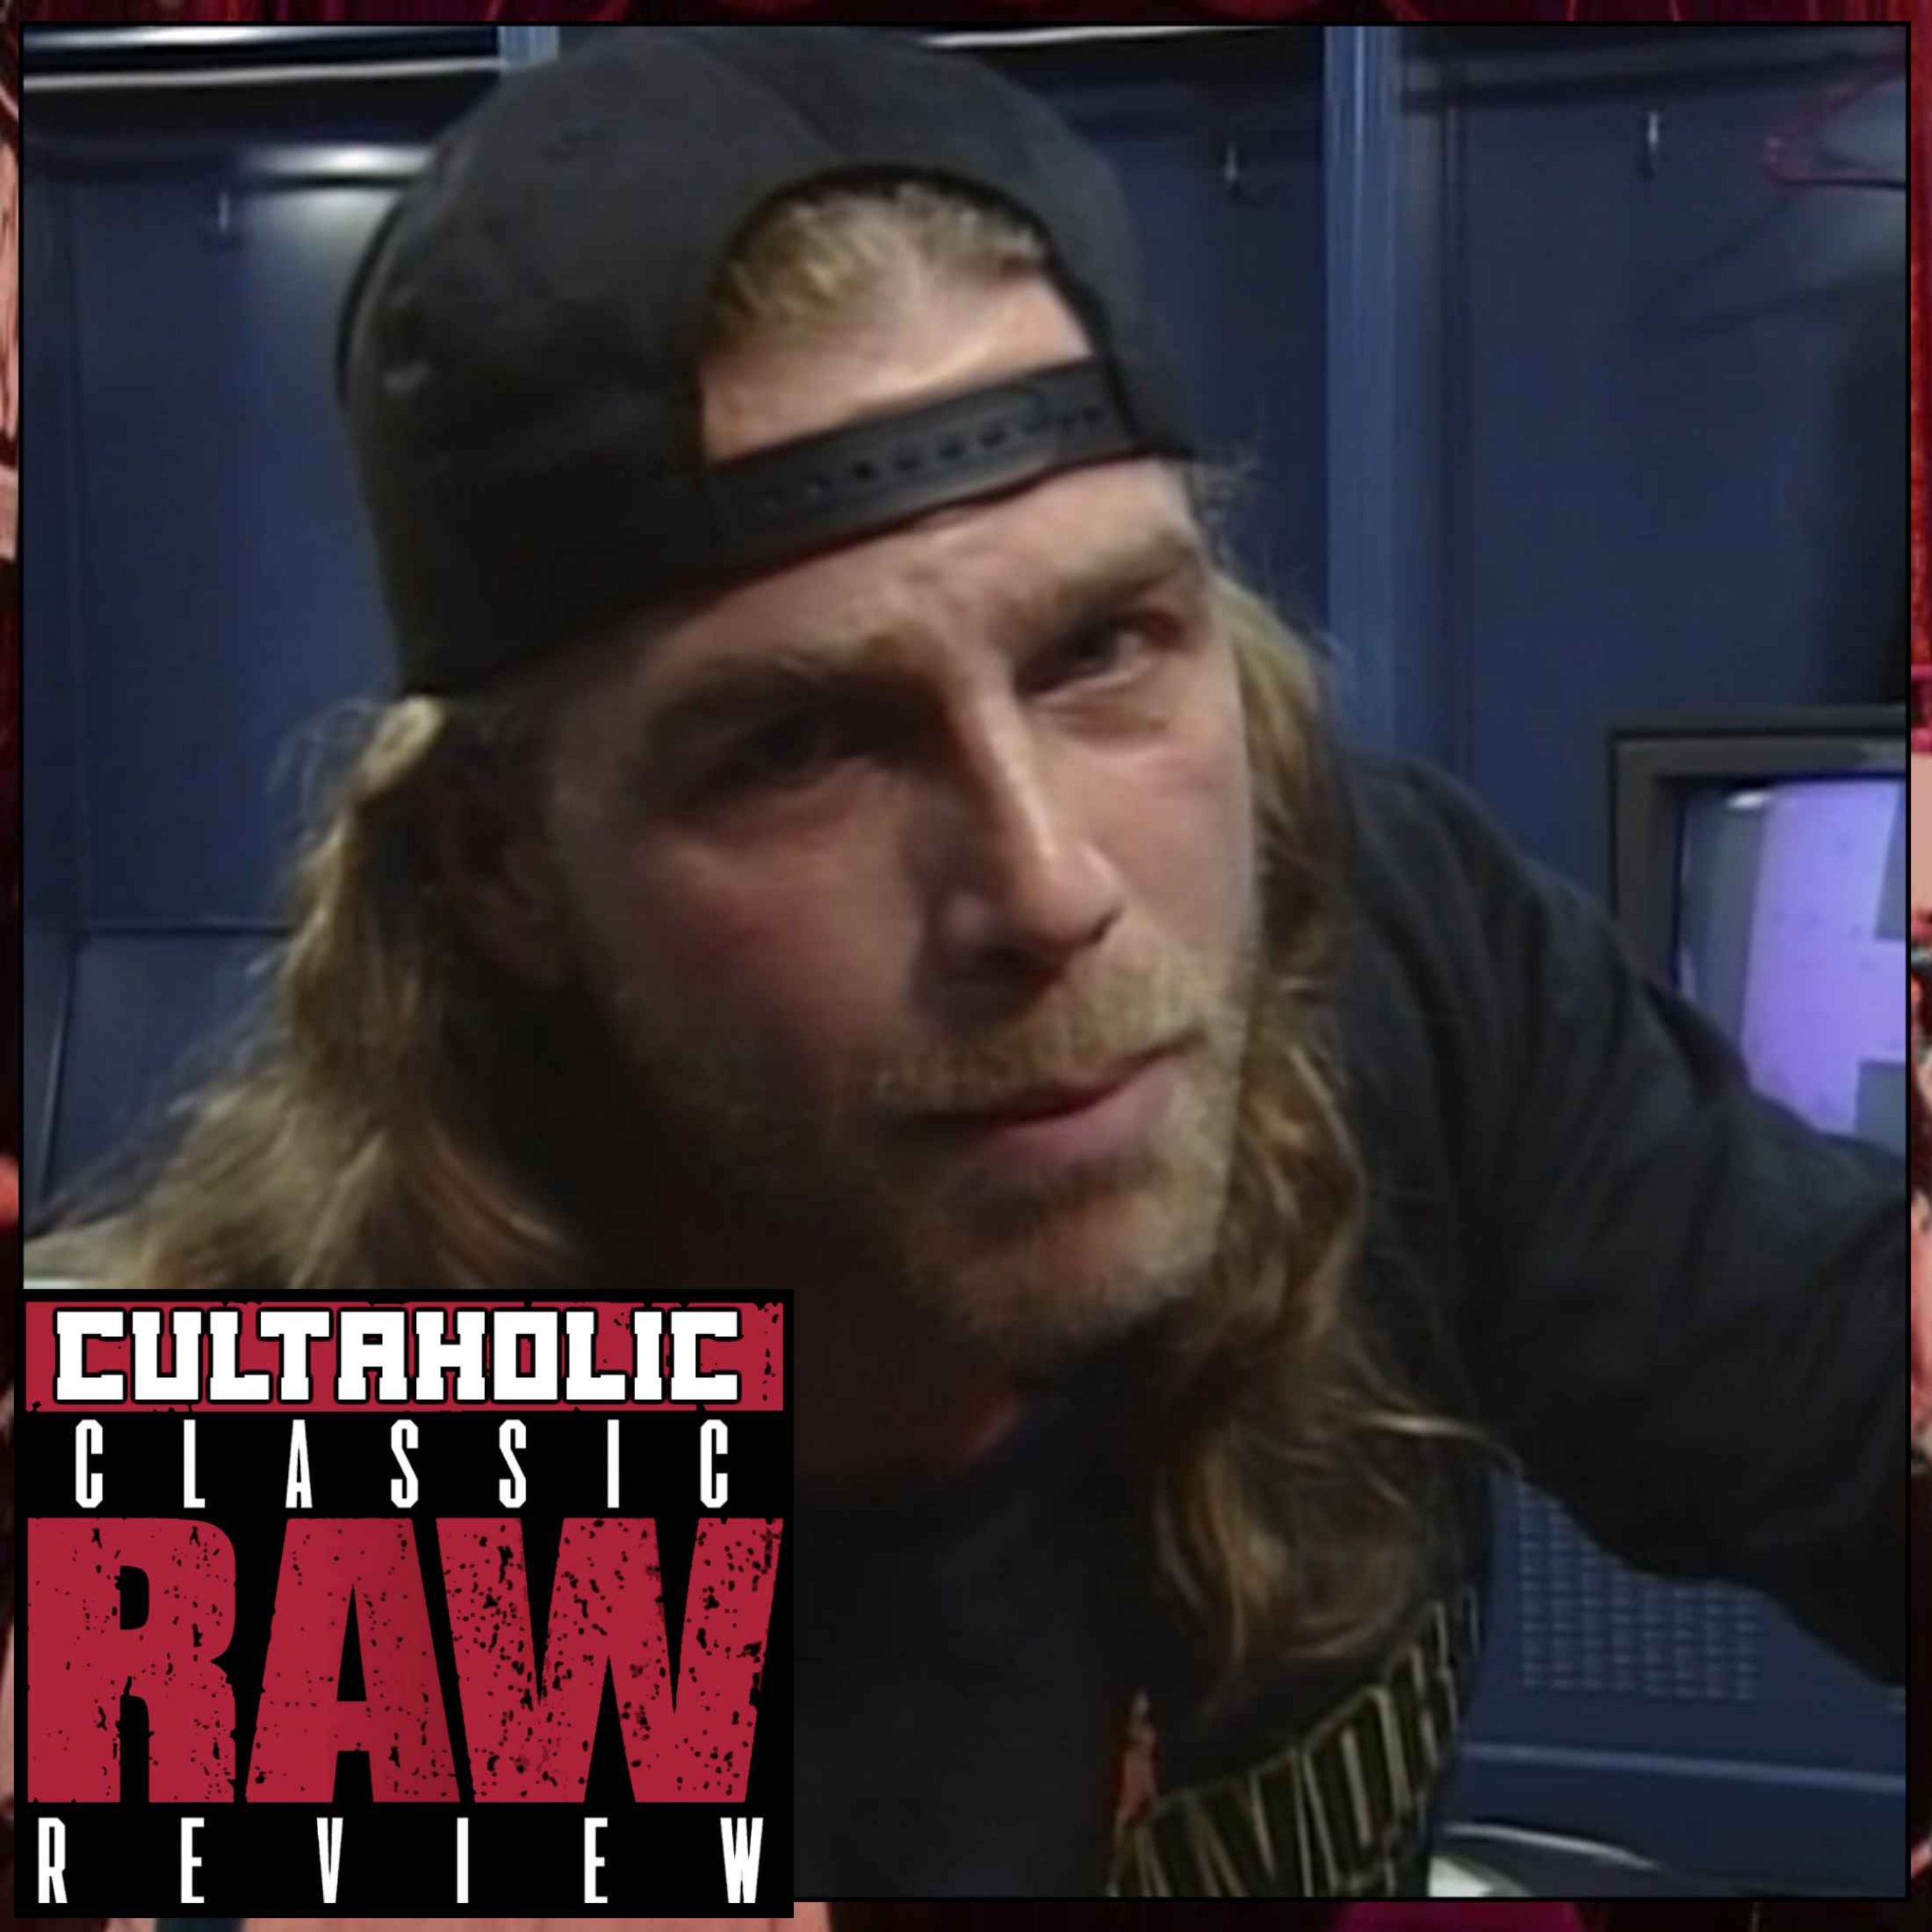 WWE Raw #190 - Shawn Michaels SHOOTS on Bret Hart, Hunter Hearst Helmsley defends the Intercontinental Title